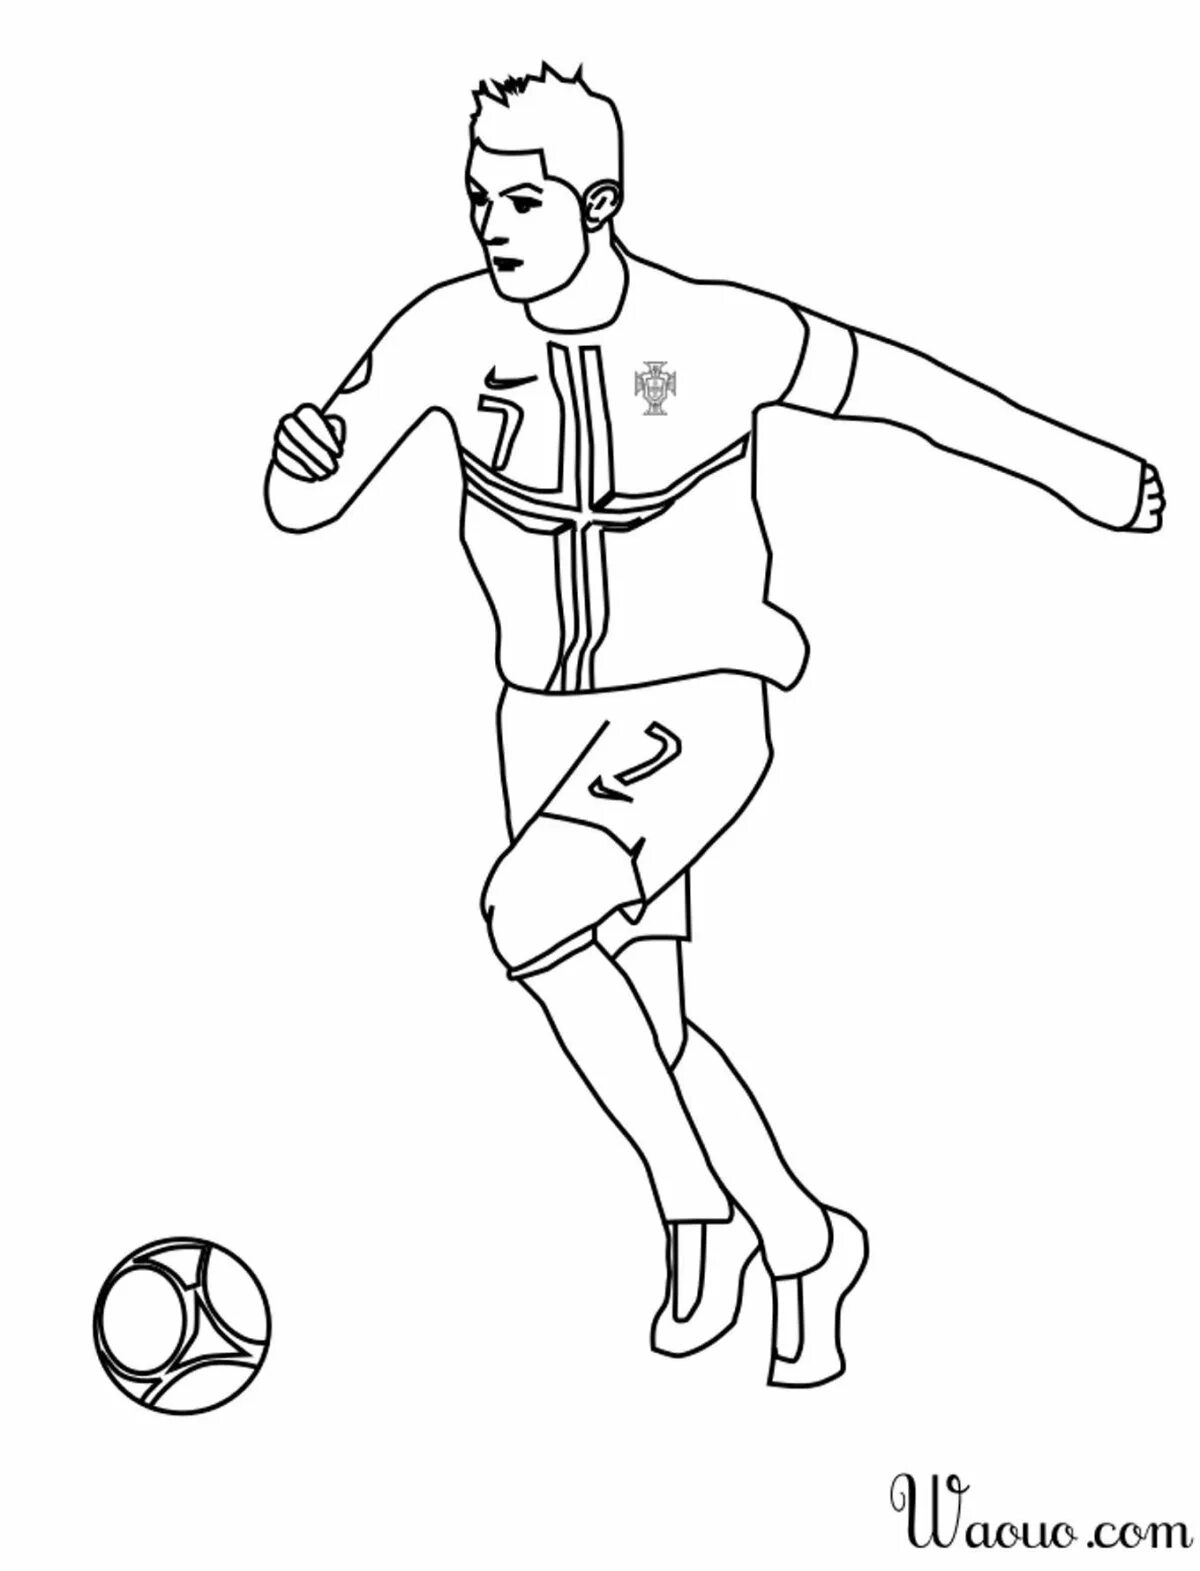 Witty ronaldo coloring book for kids